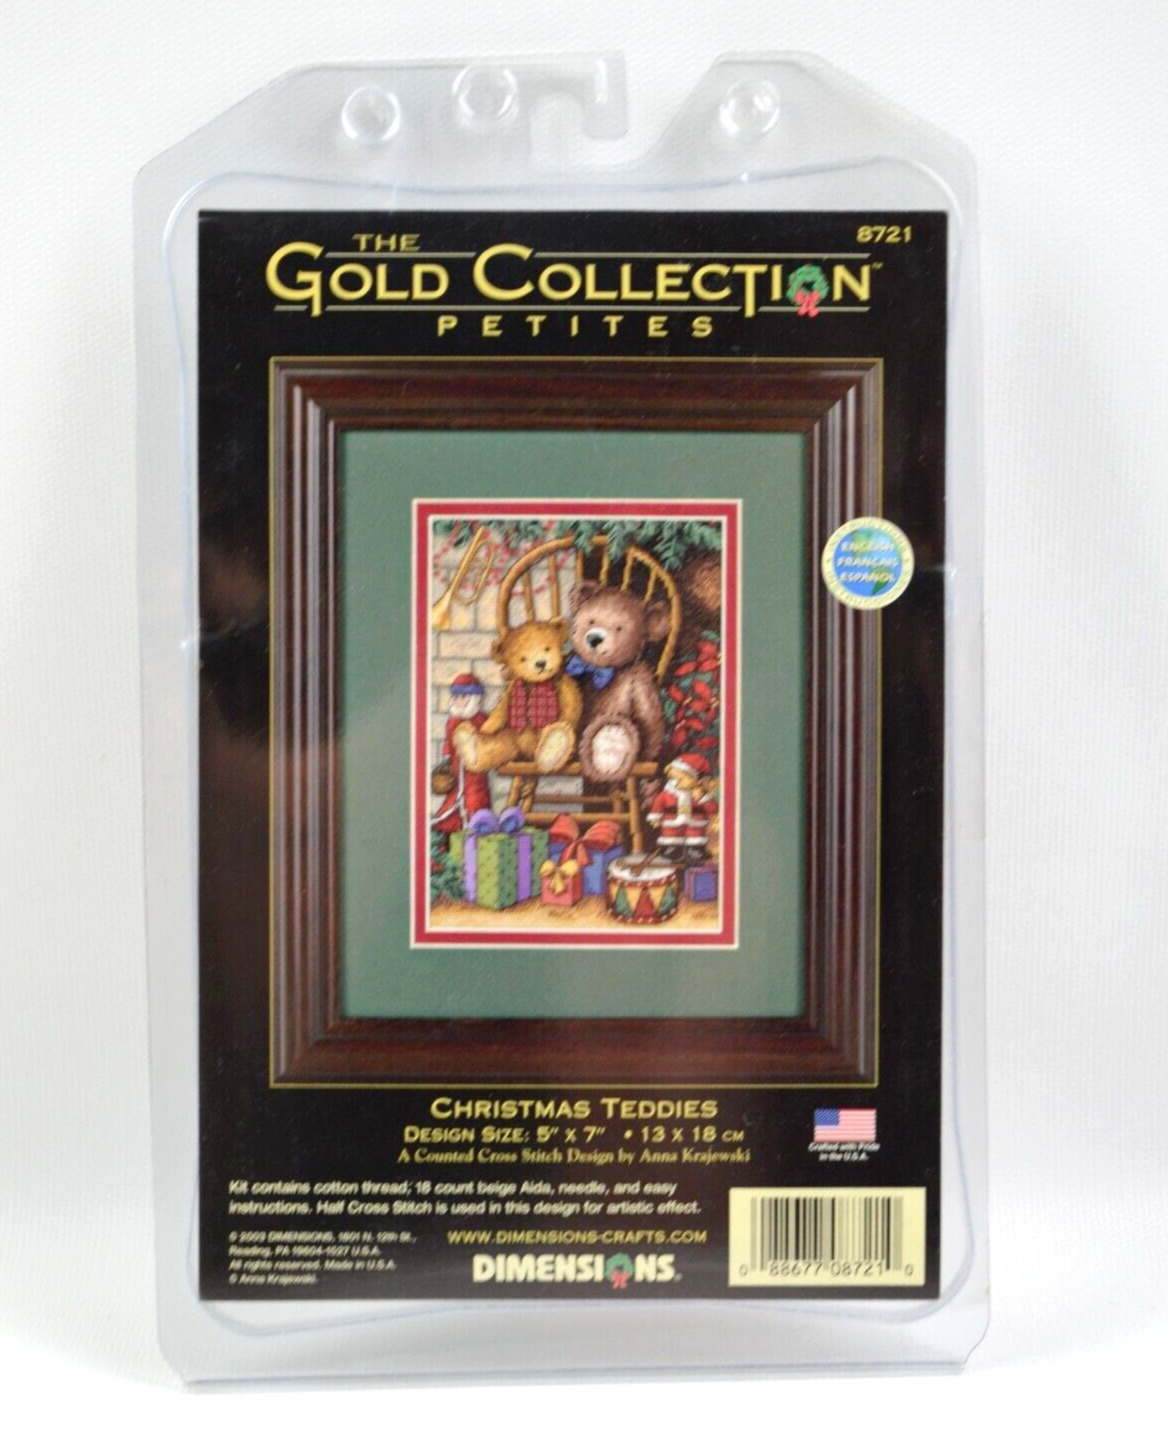 Vtg 2003 THE GOLD  COLLECTION  PETITES Cross Stich Kit CHRISTMAS TEDDIES  5x7